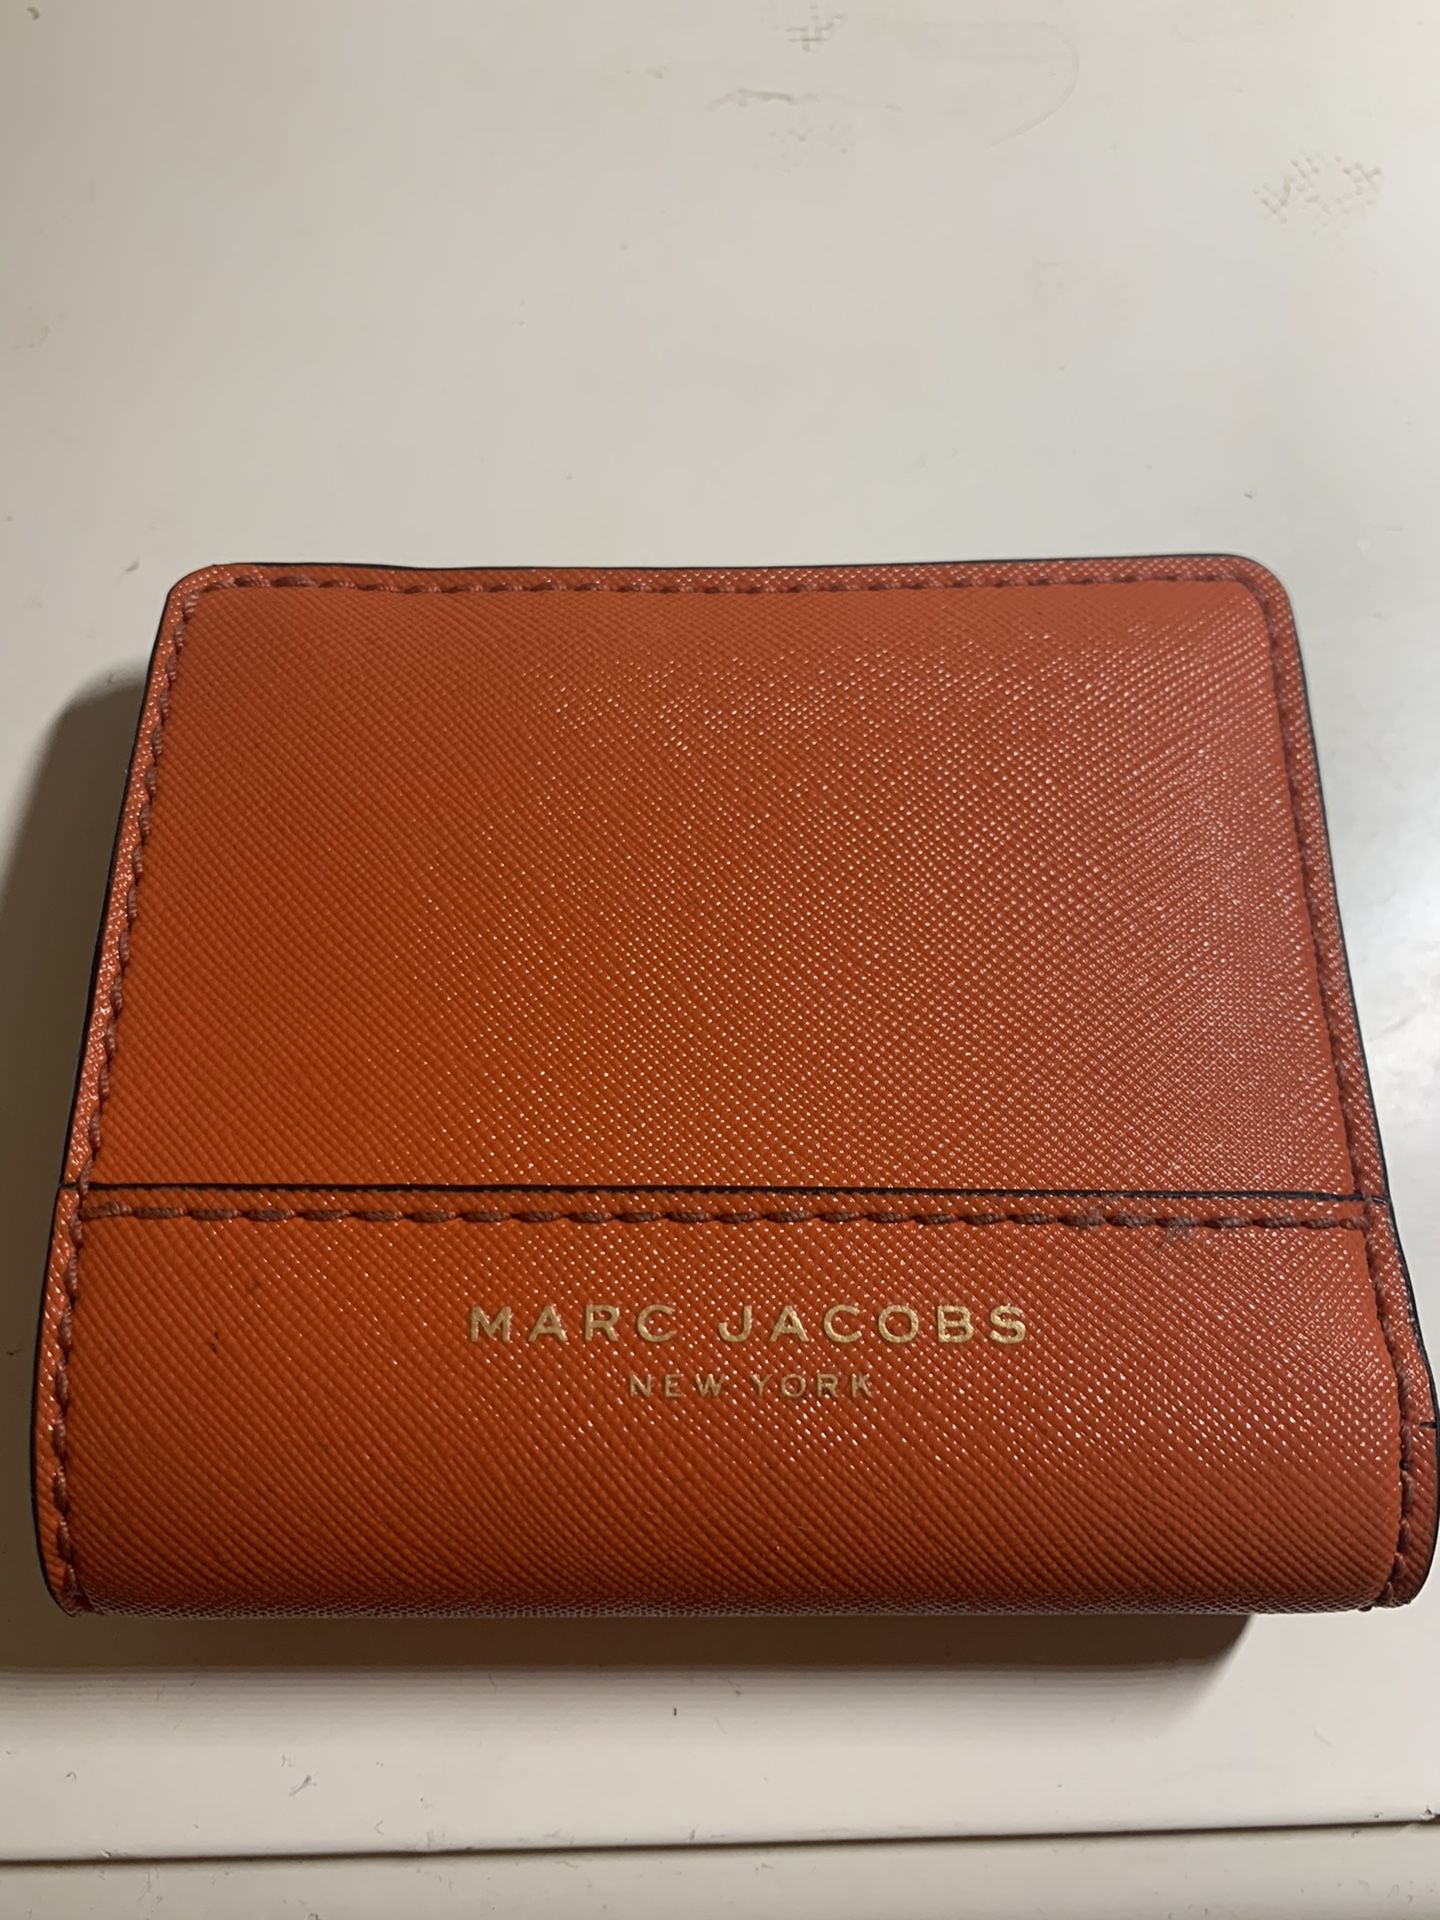 Marc Jacobs New York Red Black and Gold Genuine Leather Coated Bifold Wallet